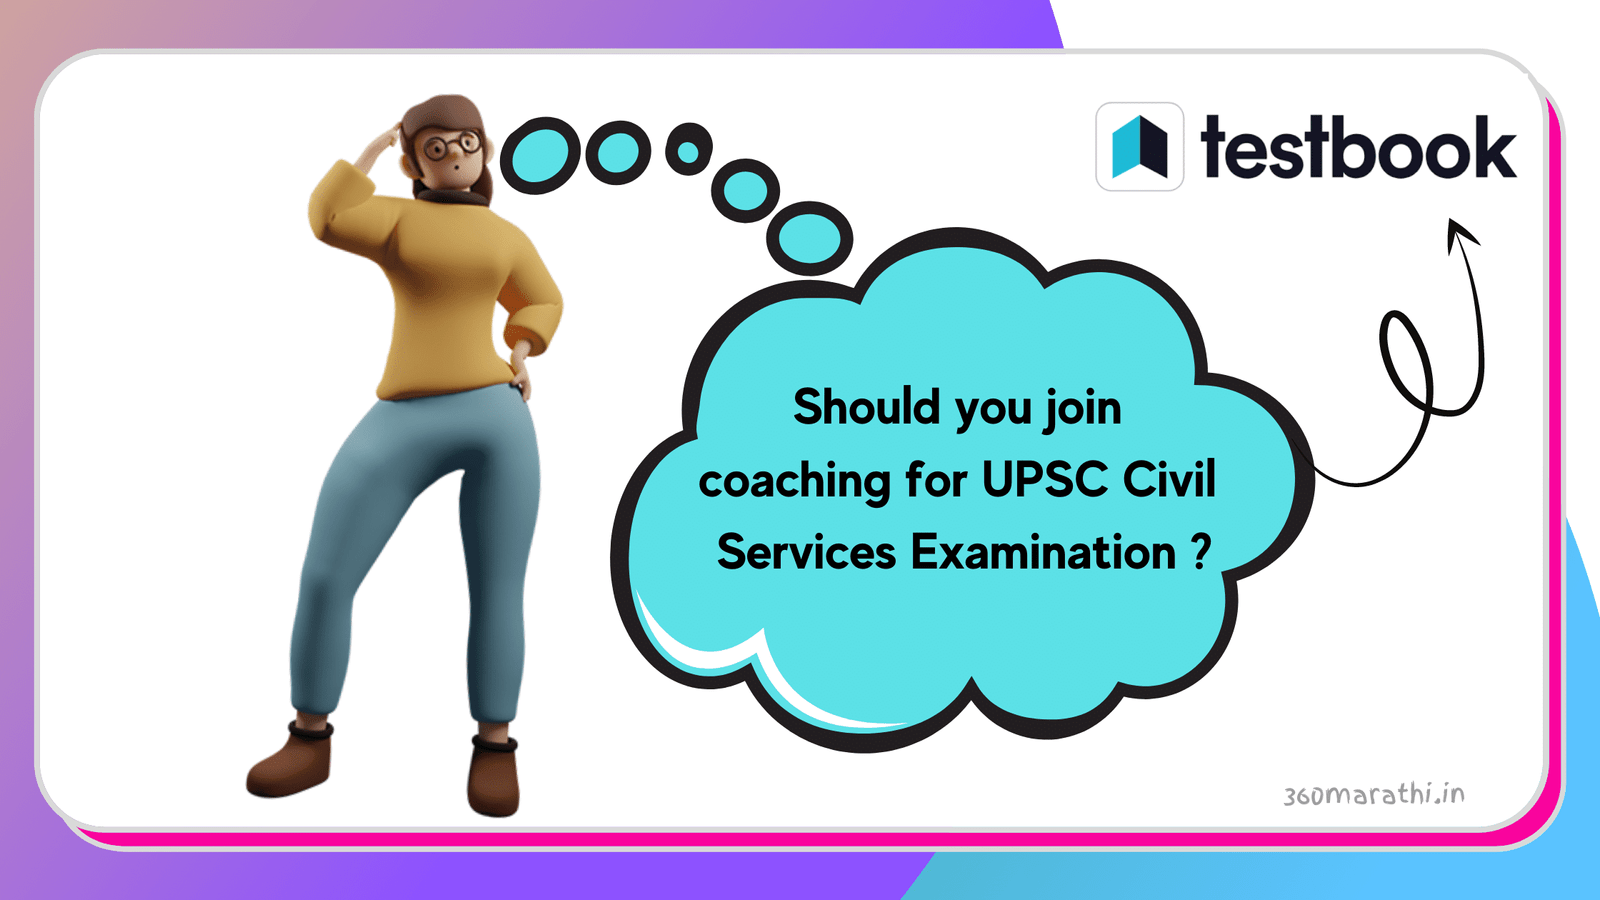 Should you join coaching for UPSC Civil Services Examination